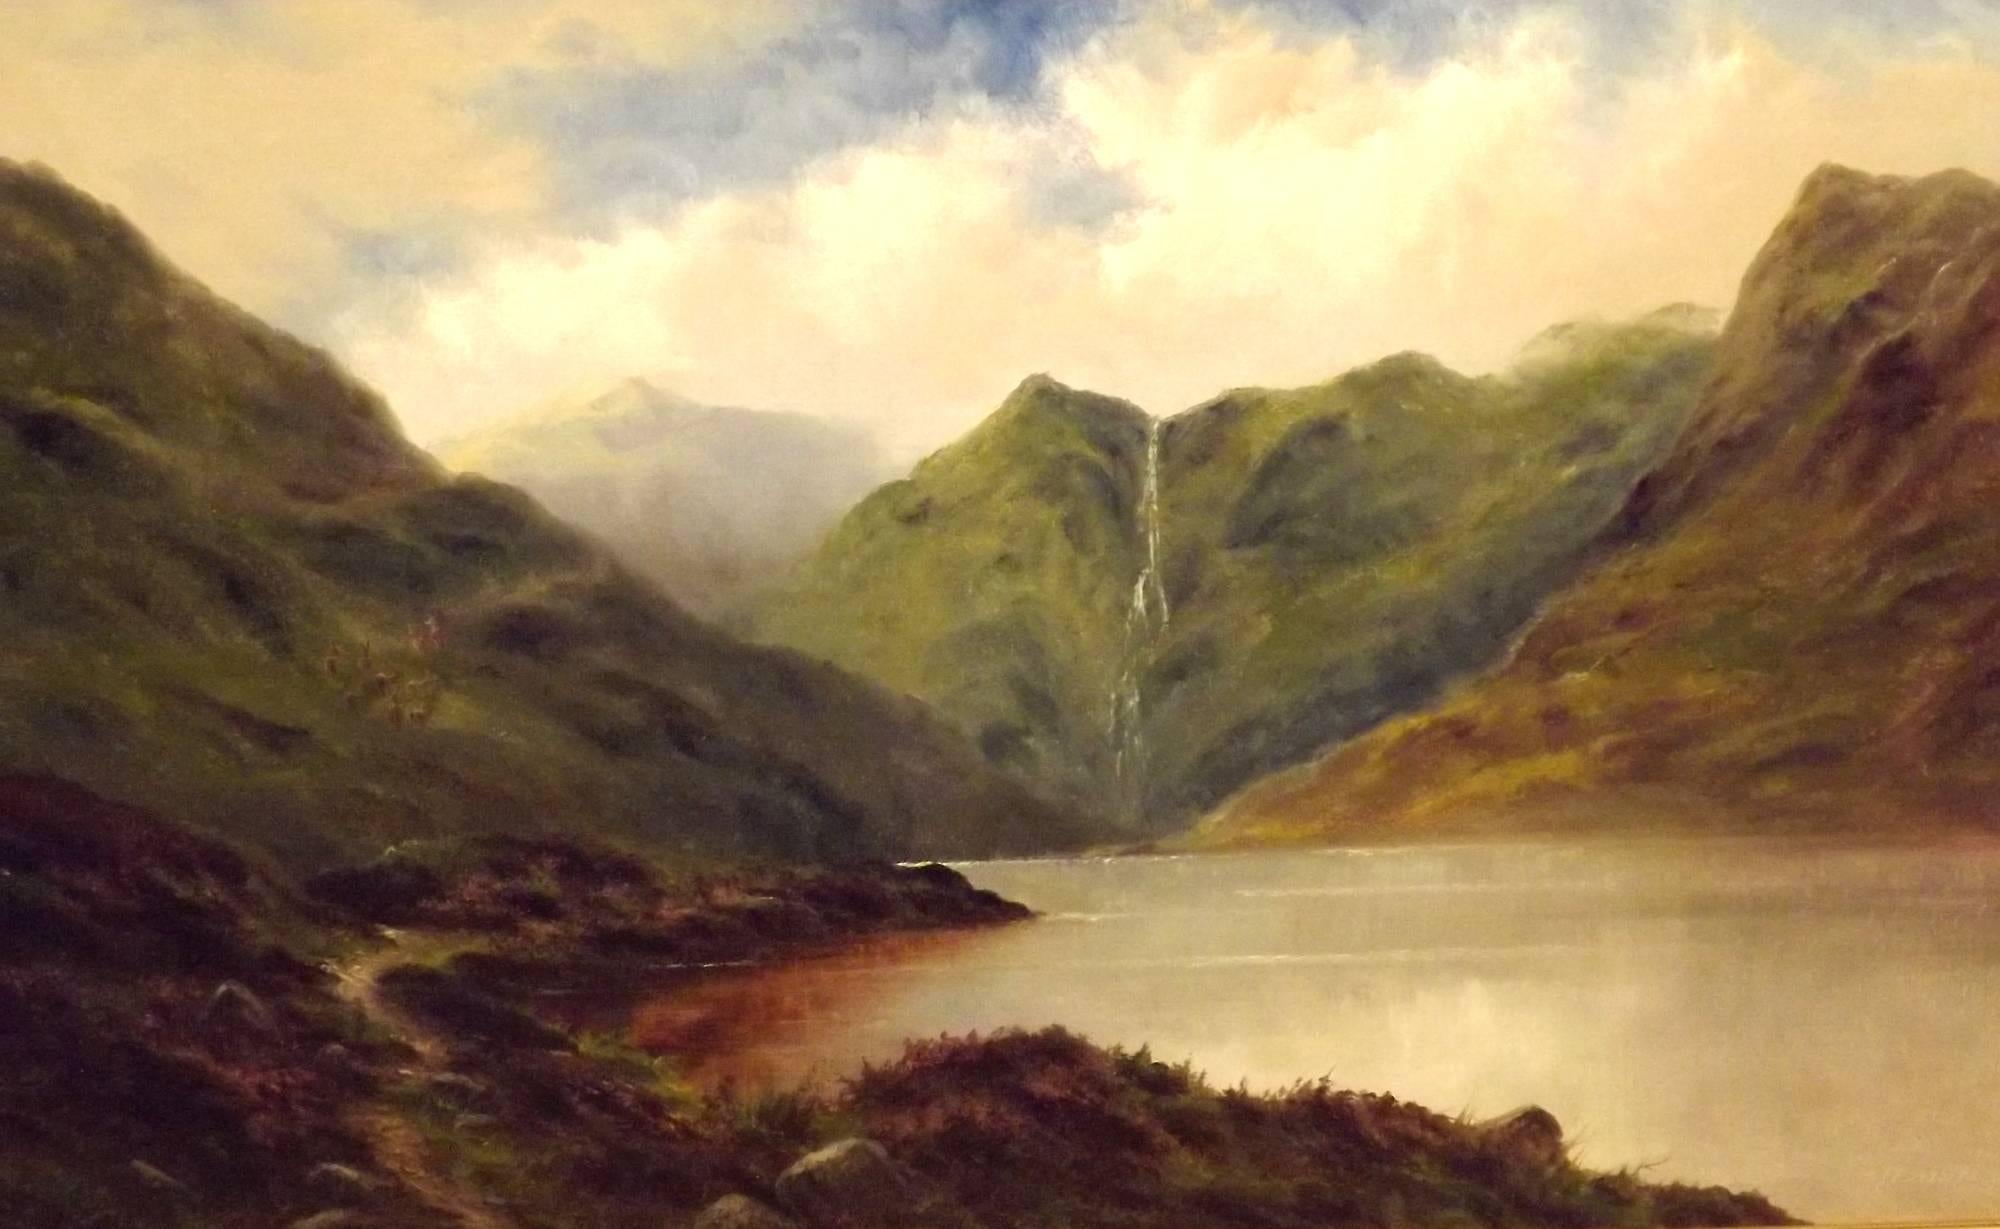 "Loch Callater with a view of Breakneck Falls" by Samuel John Barnes, 1847-1901. Signed and dated 1901. Oil on board. A painter of Scottish landscapes. Exhibited R.A. R.H.A. Patronized by Queen Victoria.

Dimensions framed:
Width